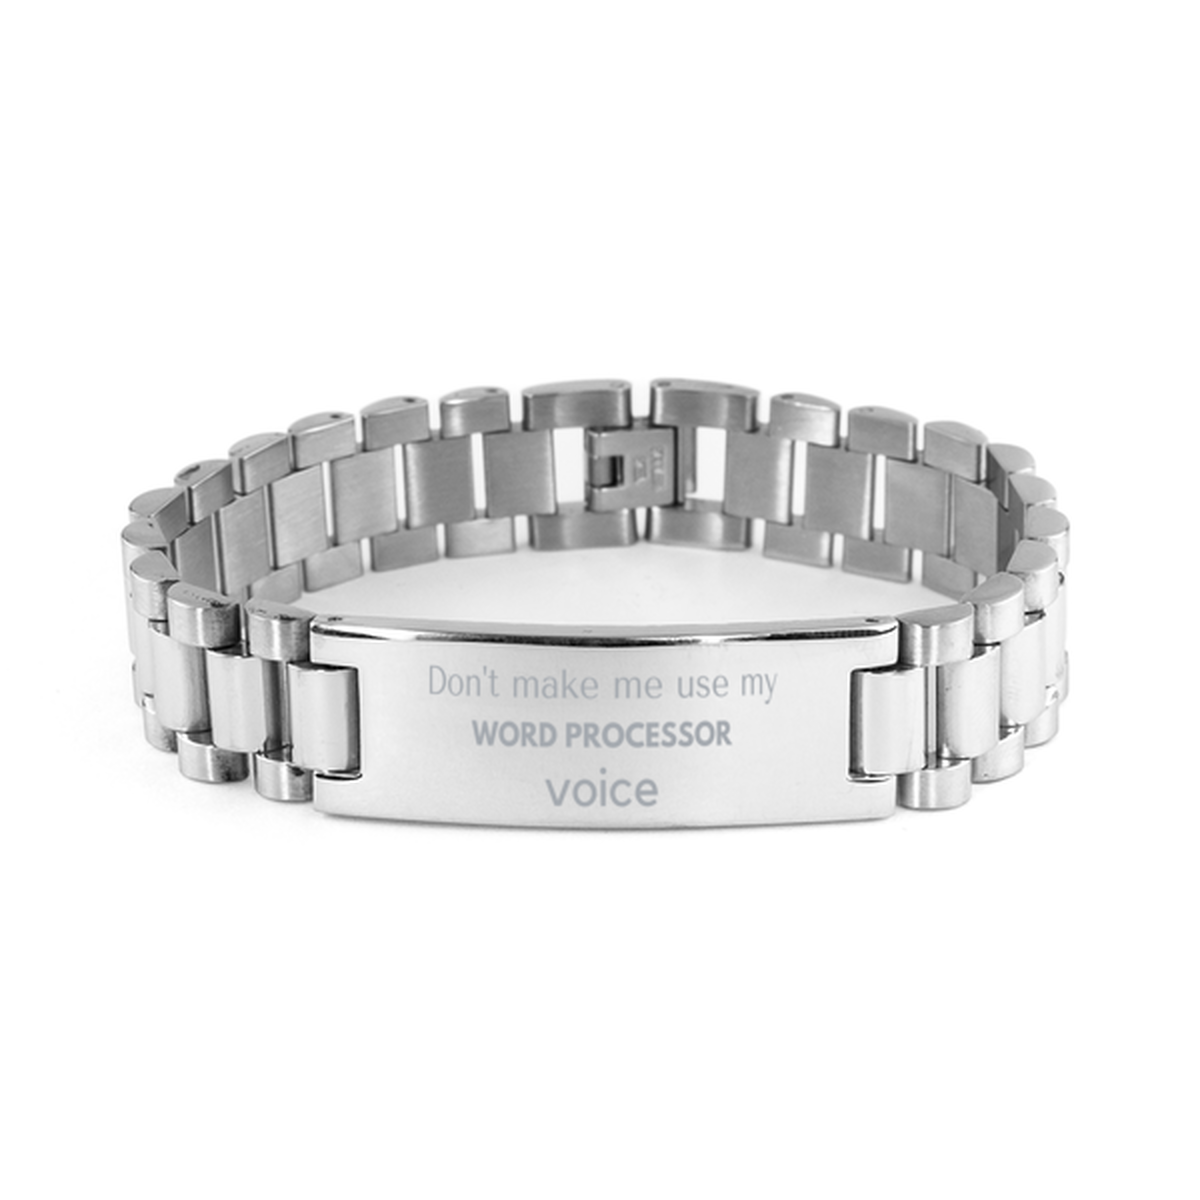 Don't make me use my Word Processor voice, Sarcasm Word Processor Gifts, Christmas Word Processor Ladder Stainless Steel Bracelet Birthday Unique Gifts For Word Processor Coworkers, Men, Women, Colleague, Friends